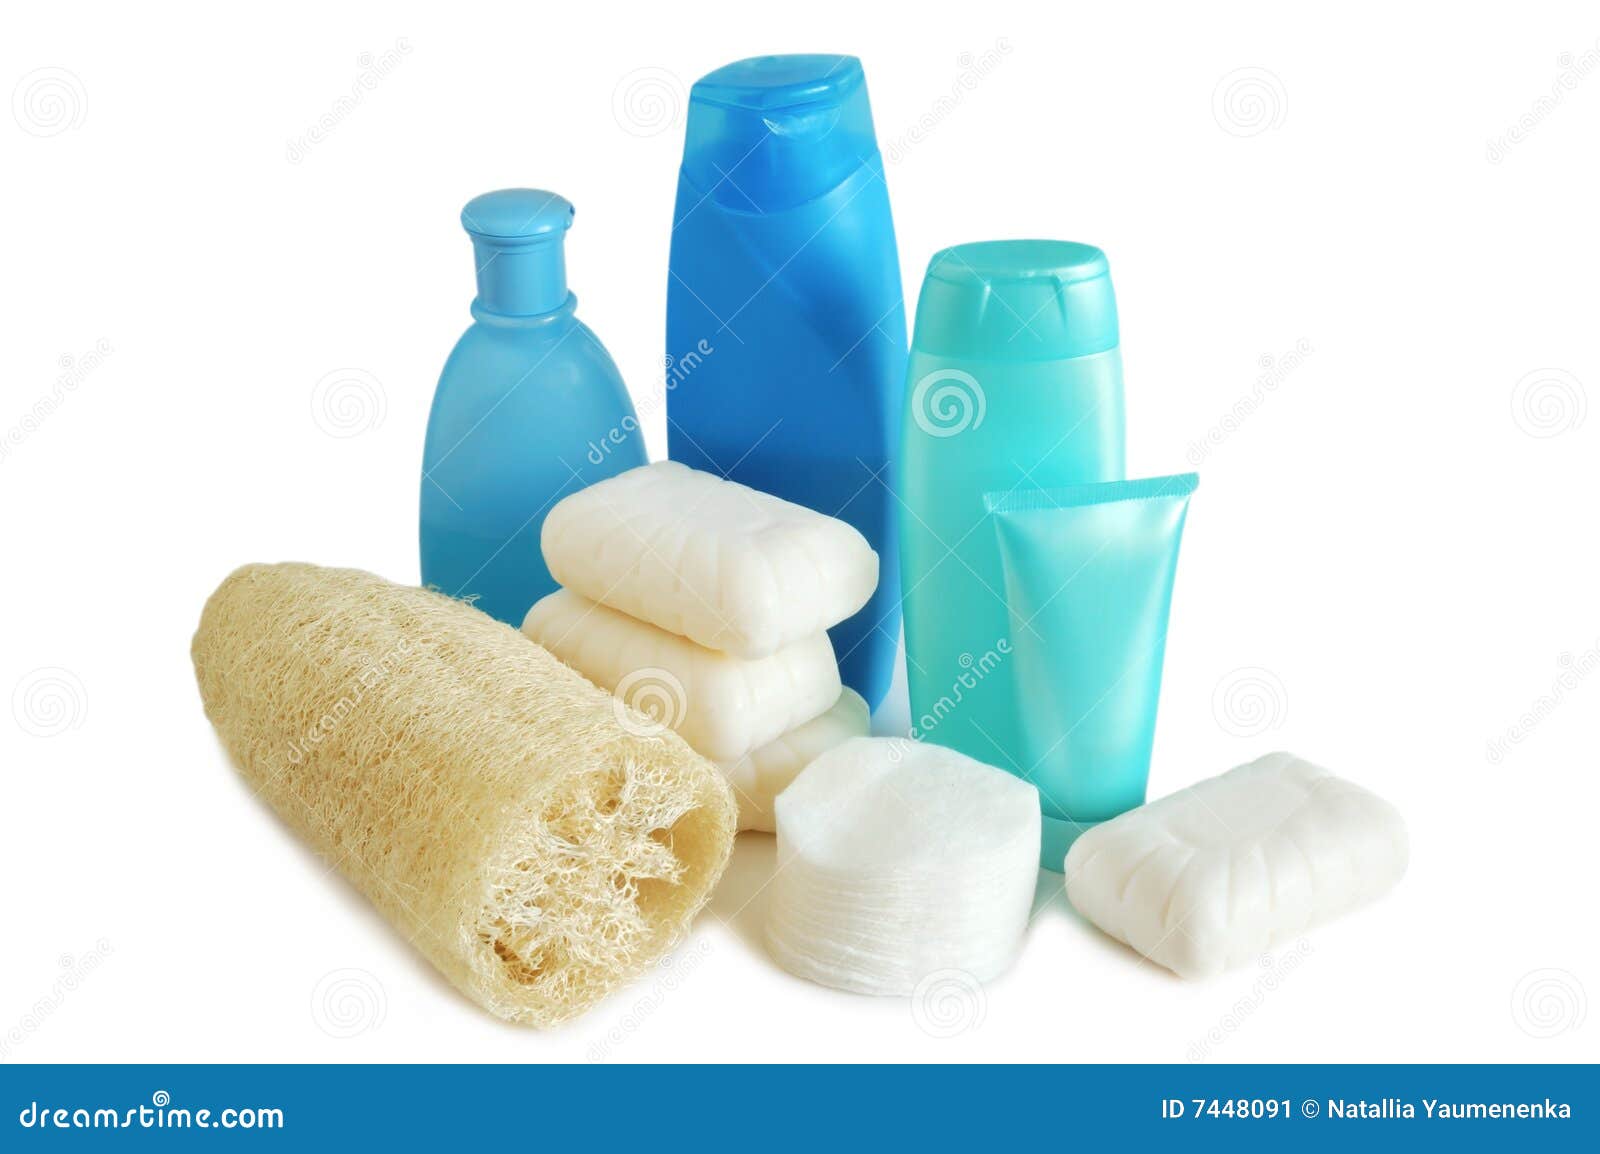 https://thumbs.dreamstime.com/z/household-items-cleanliness-7448091.jpg